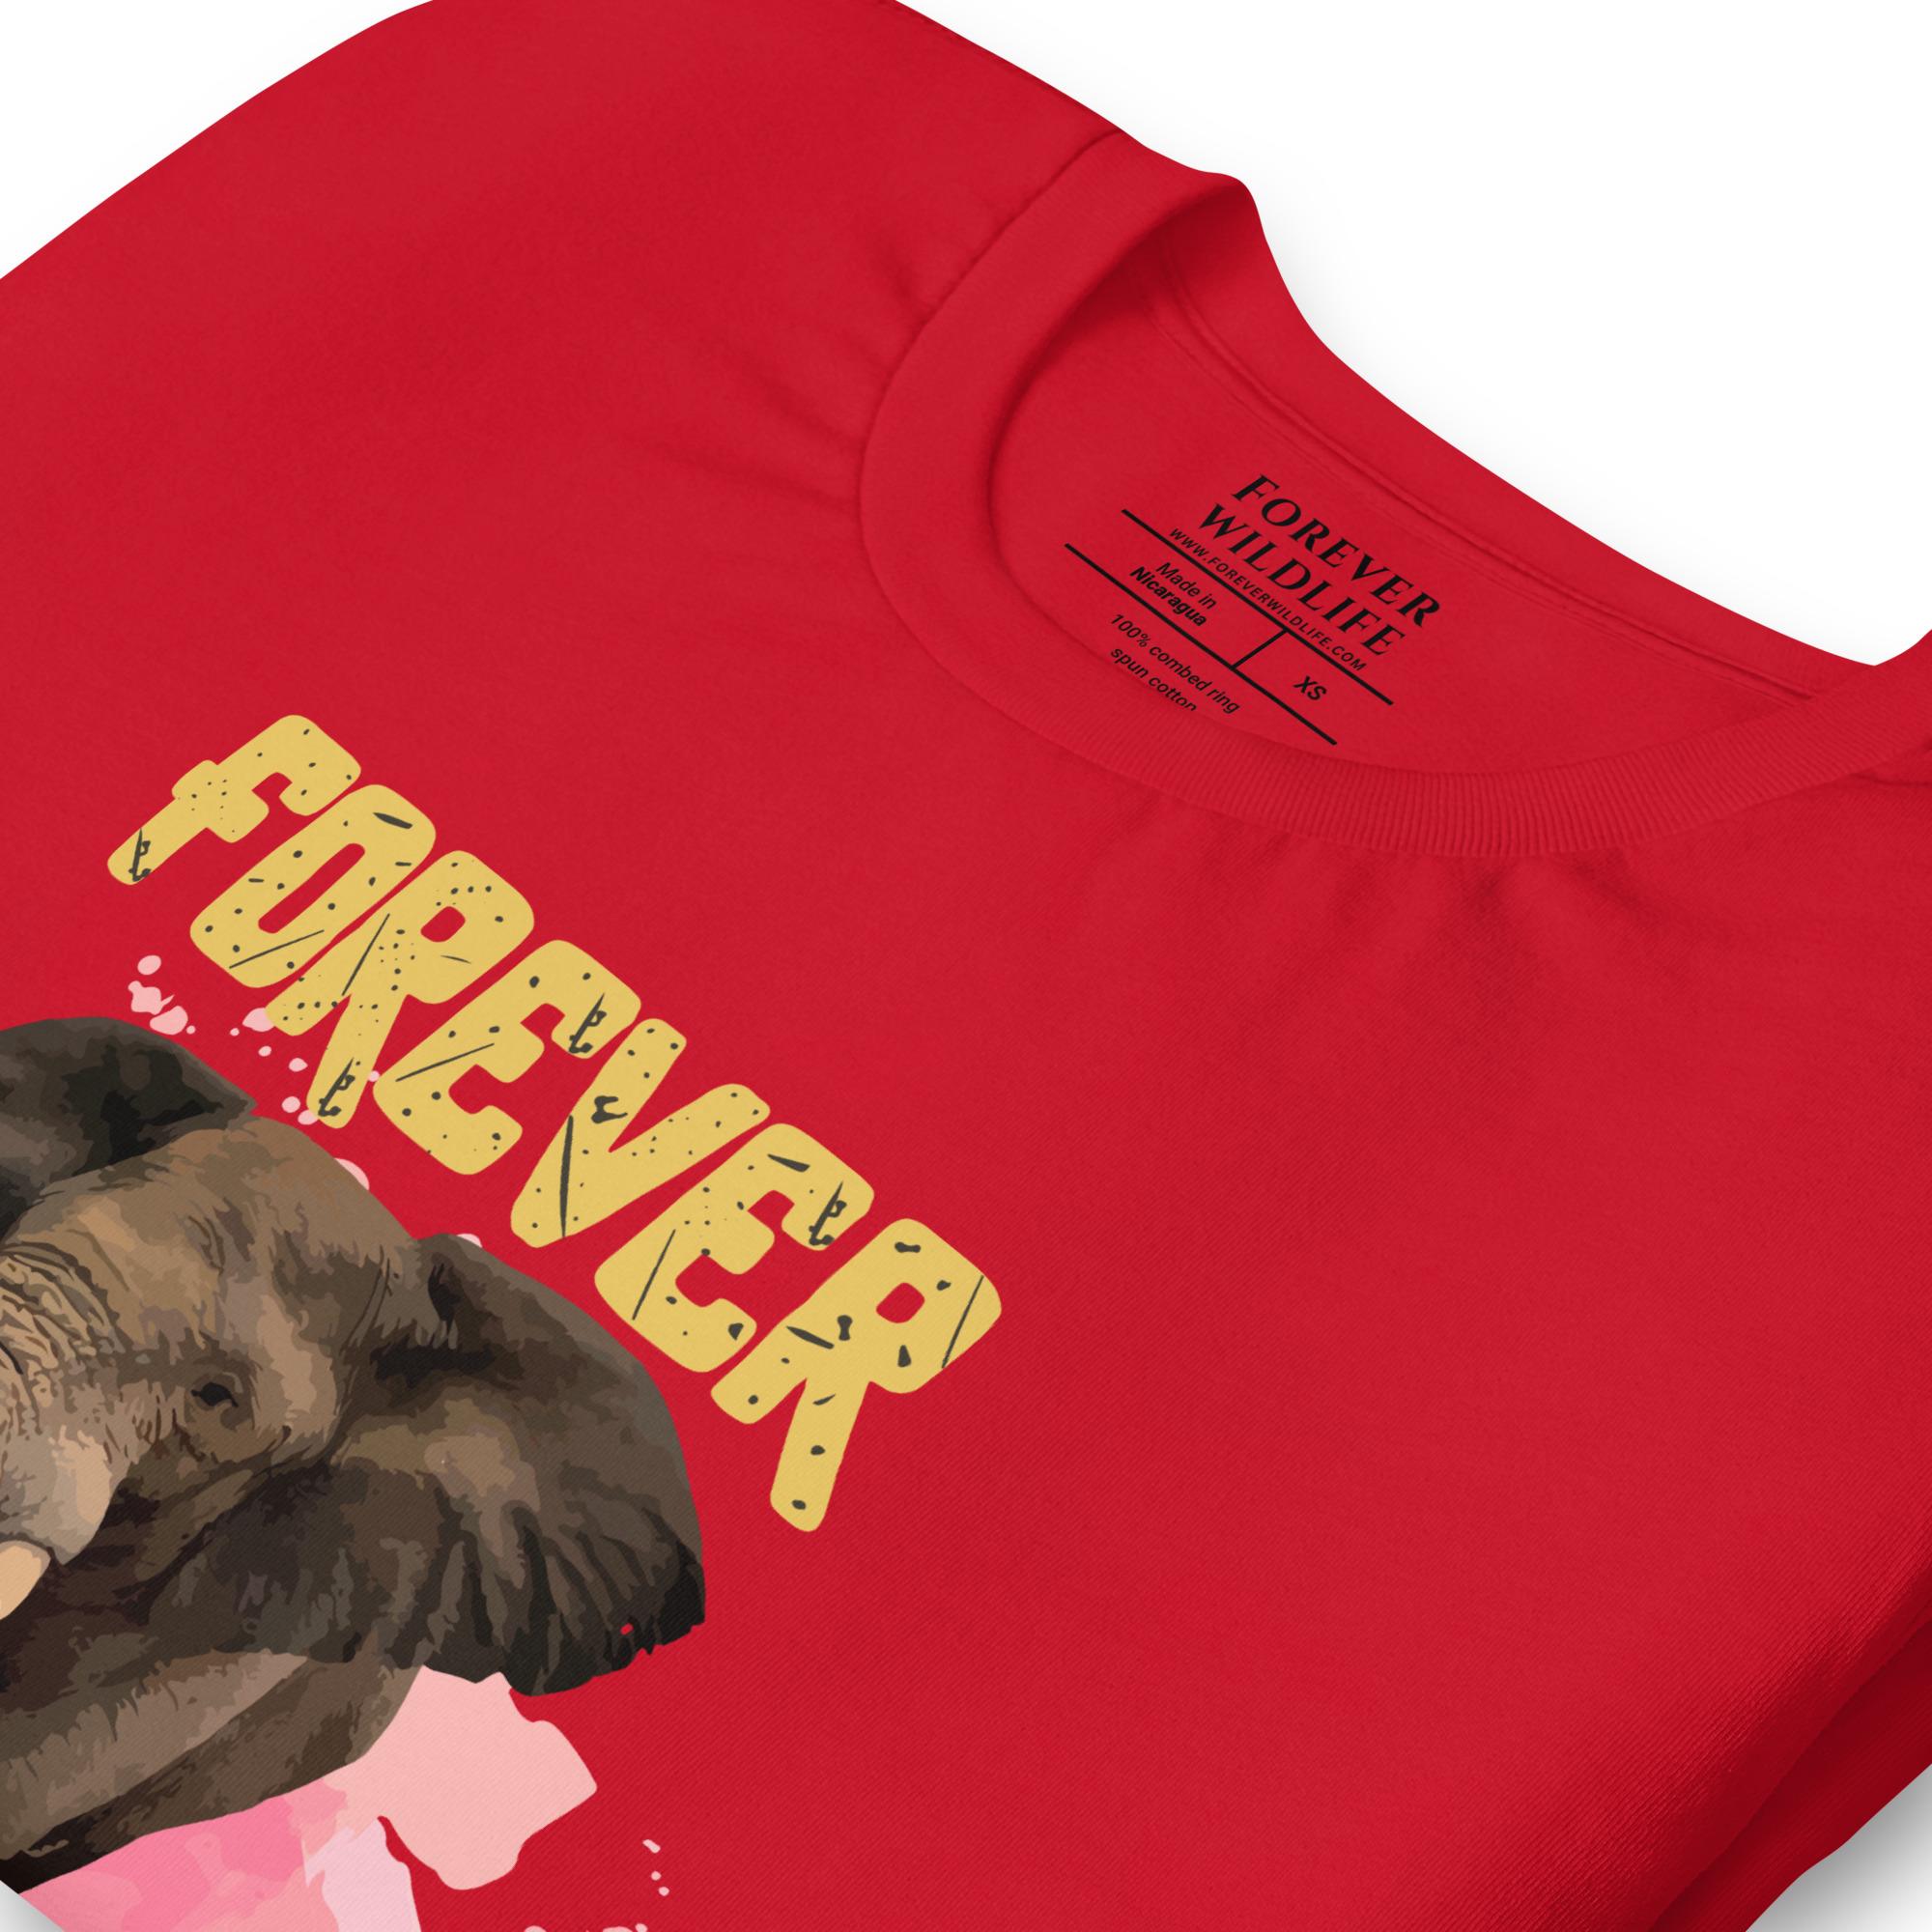 Elephant T-Shirt in Red – Premium Wildlife T-Shirt Design, Wildlife Clothing & Apparel from Forever Wildlife